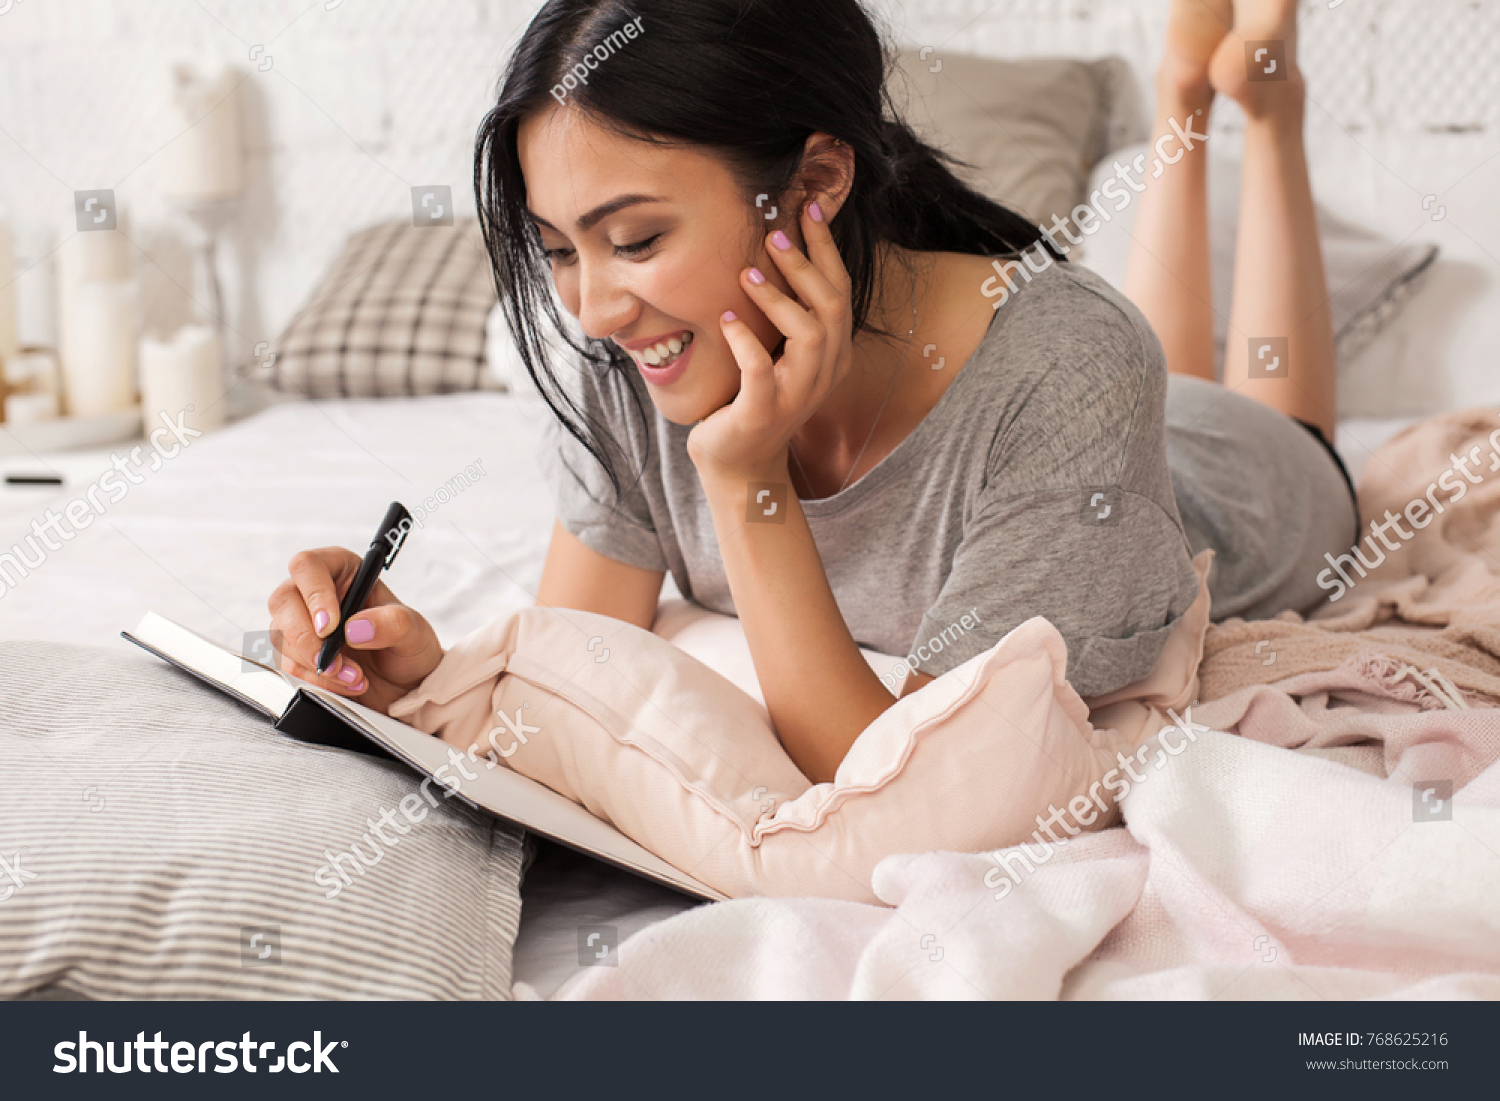 Beautiful young asian woman laying on bed and writing a diary. Smiling brunette lady with notebook and pen in her hands. Modern bright home interior on background. #768625216